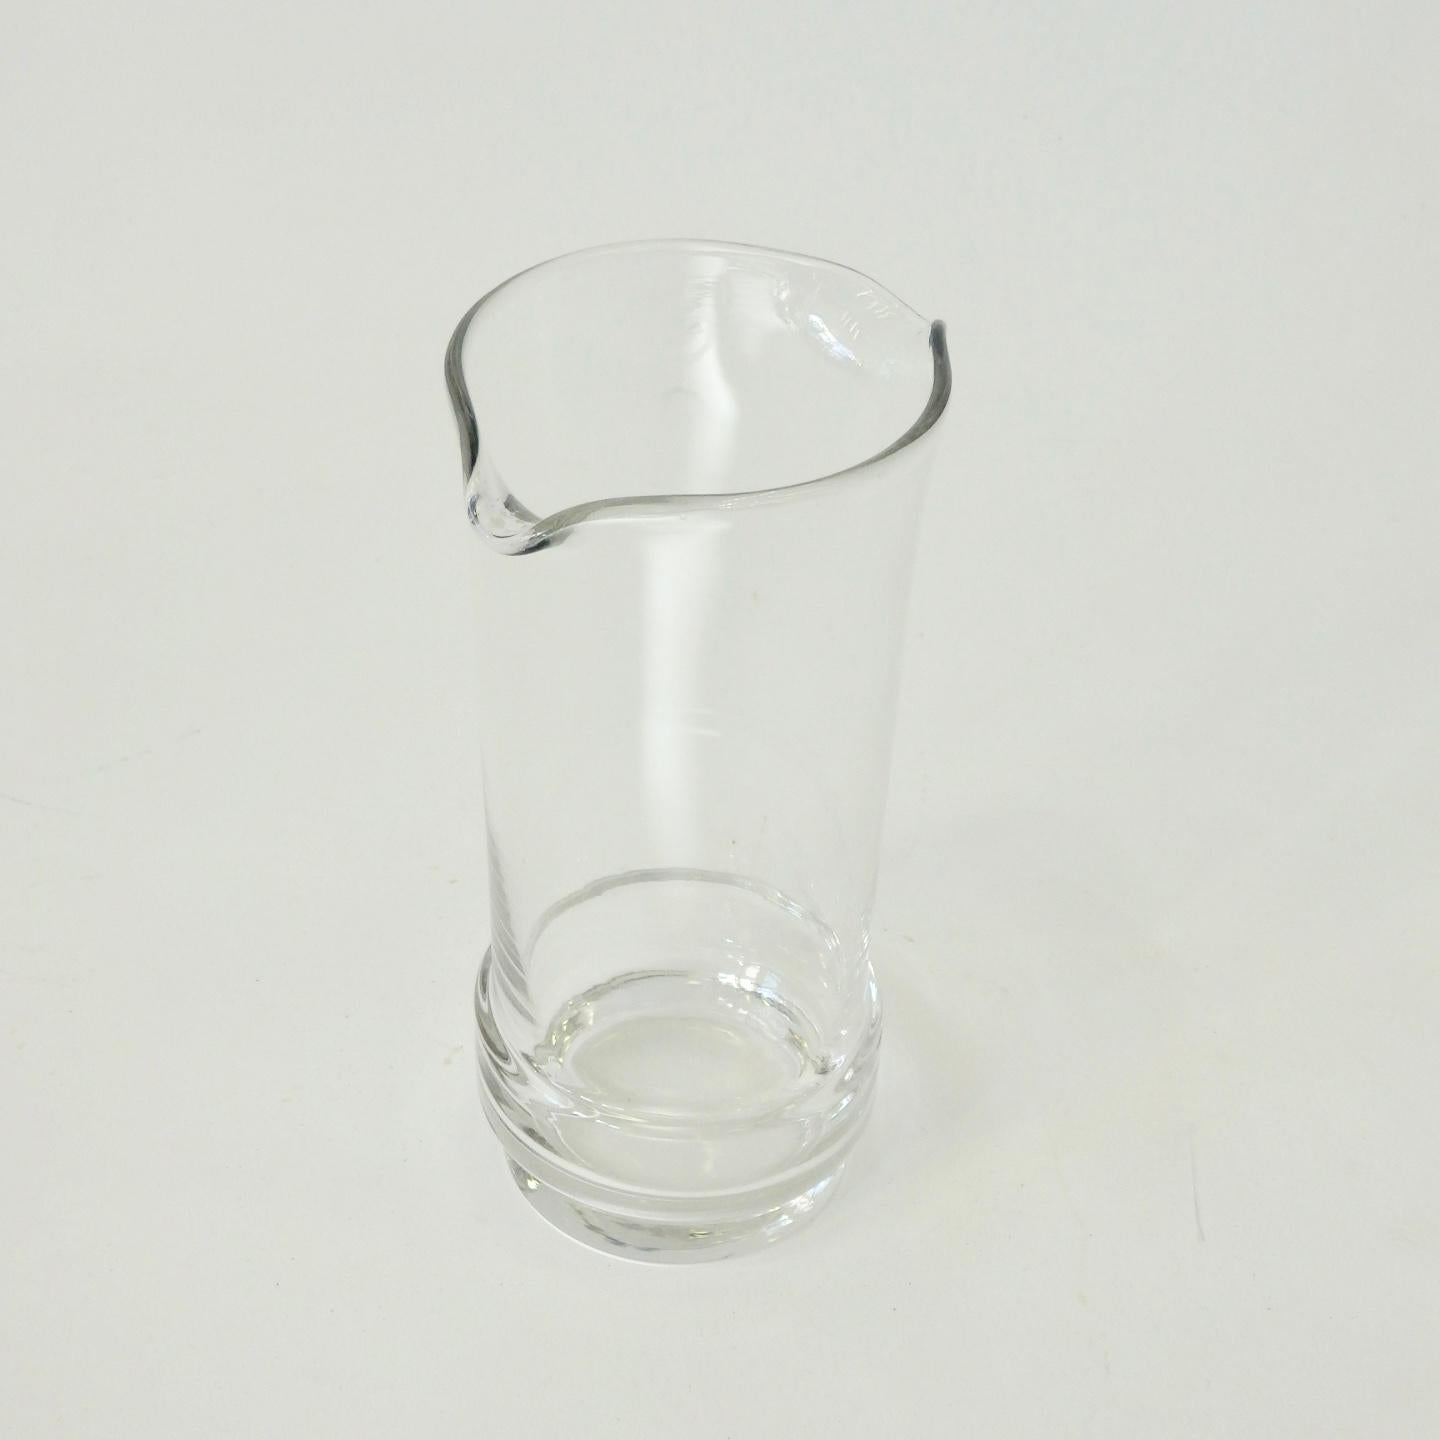 Clear glass martini or cocktail drinks beaker. Pours from either side.